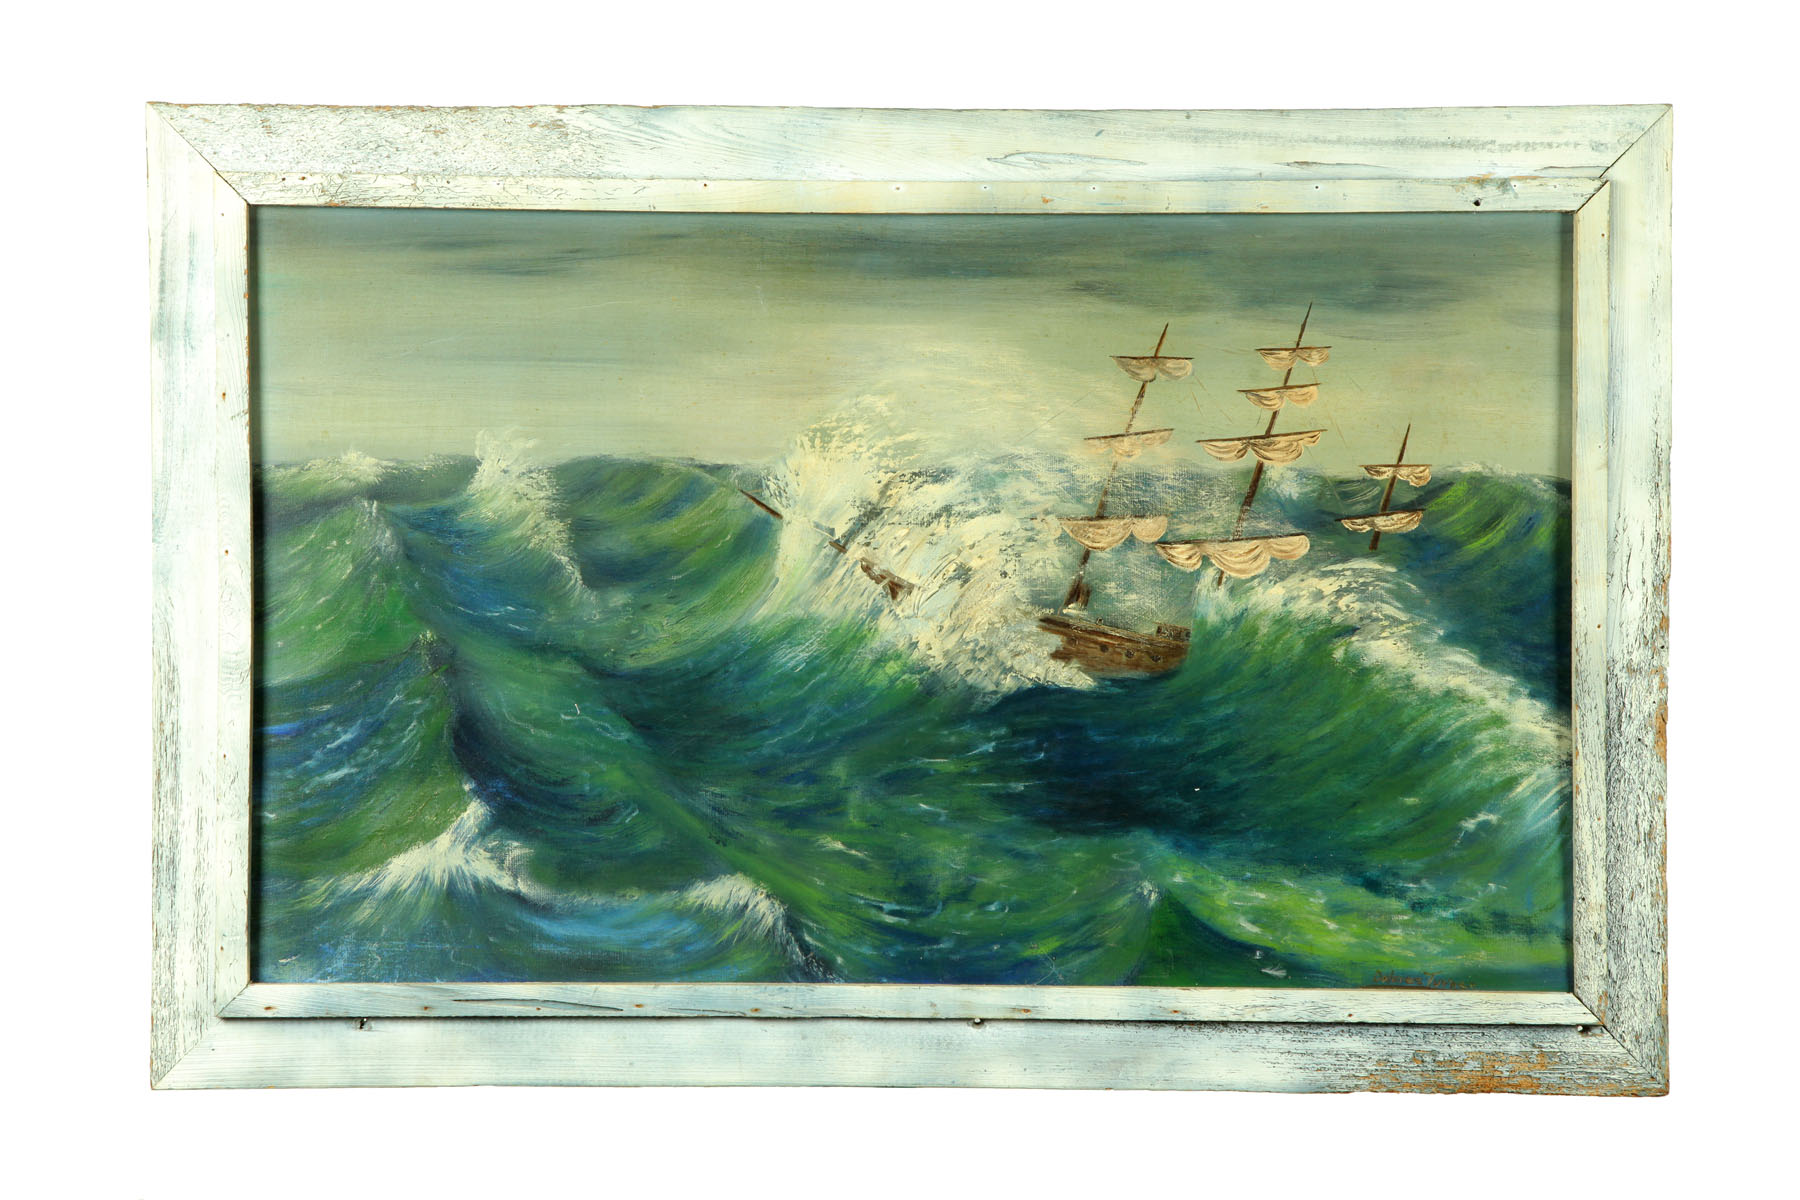 SHIP IN STORM BY DELORES TURNER